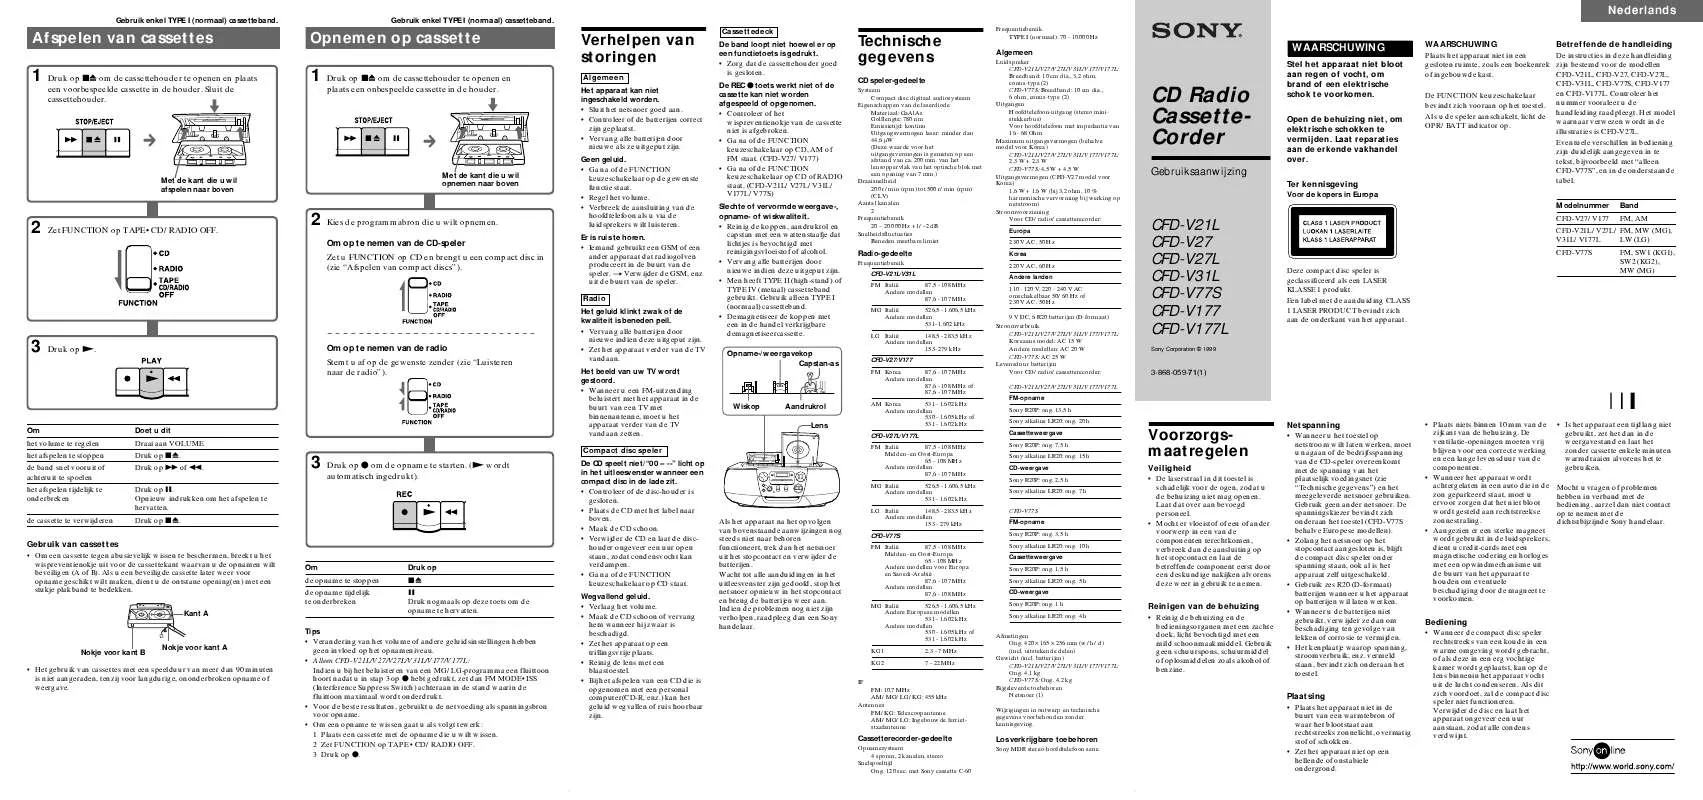 Mode d'emploi SONY CFD-V177L